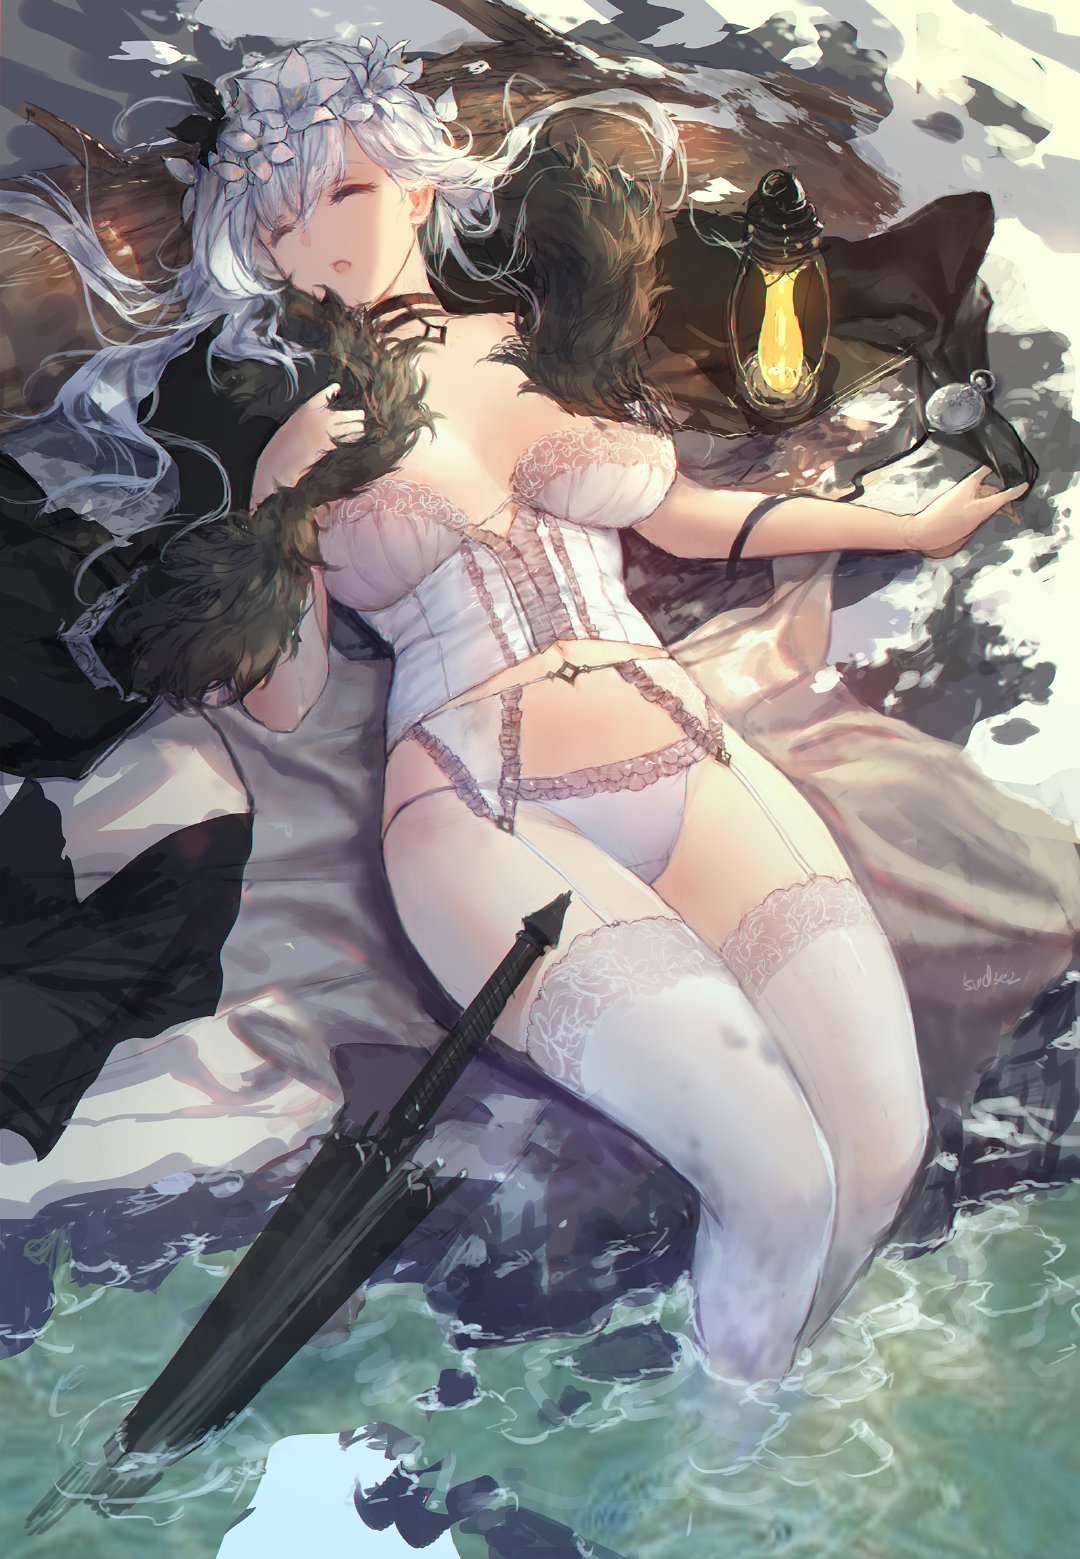 Anime 1080x1559 Swd3e2 anime girls suspenders lace garter garter belt white stockings stockings white lingerie sleeping lace lingerie lace leotard women outdoors wet clothing necklace messy hair big boobs smooth body umbrella lantern flower crown snow covered snow corset